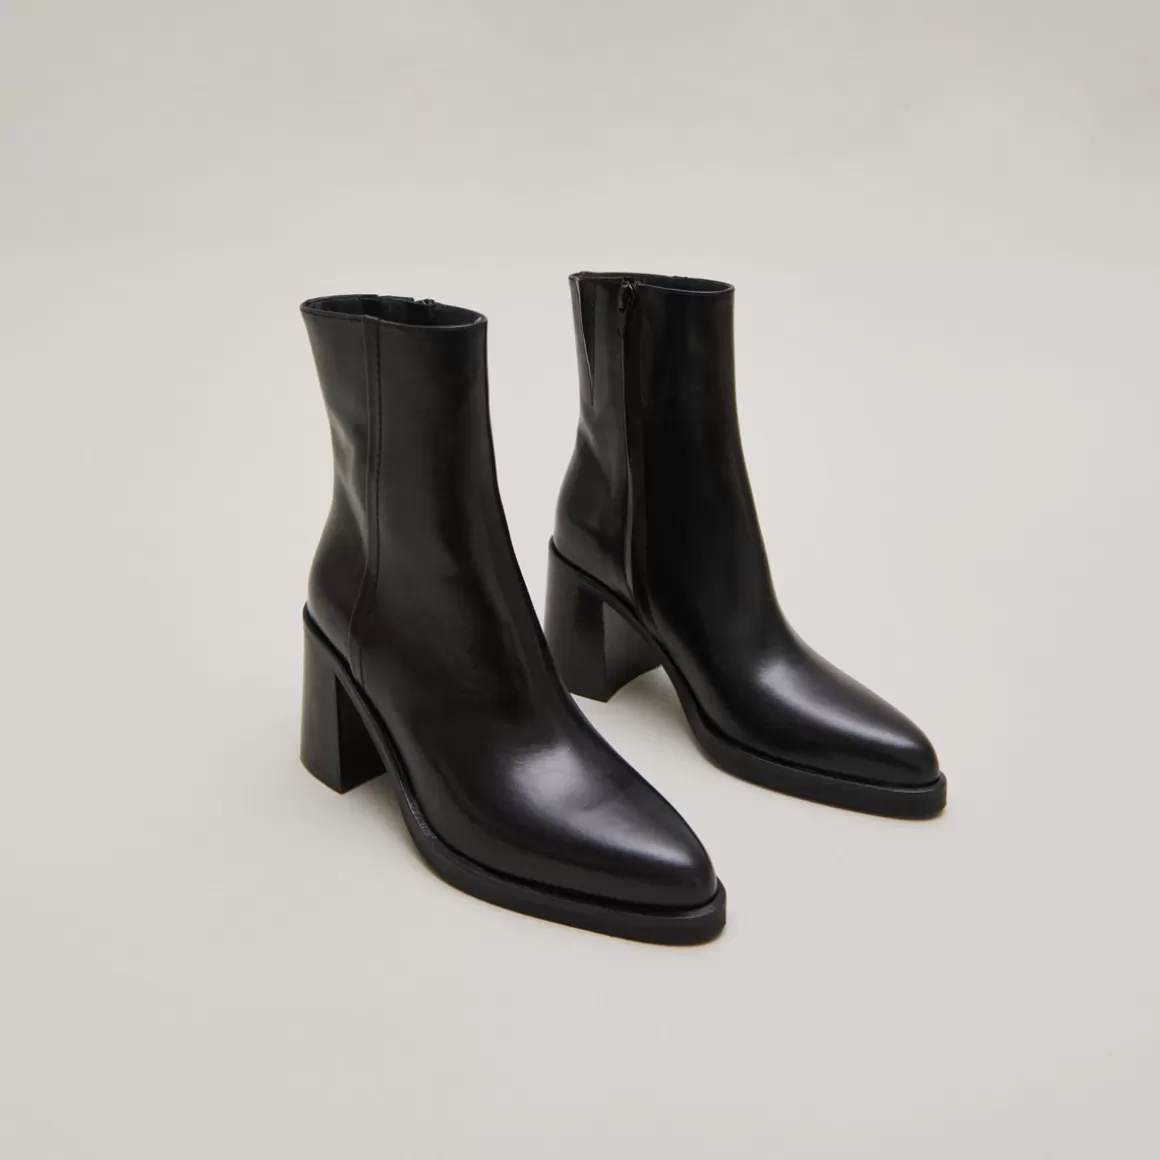 Ankle boots with heels<Jonak New